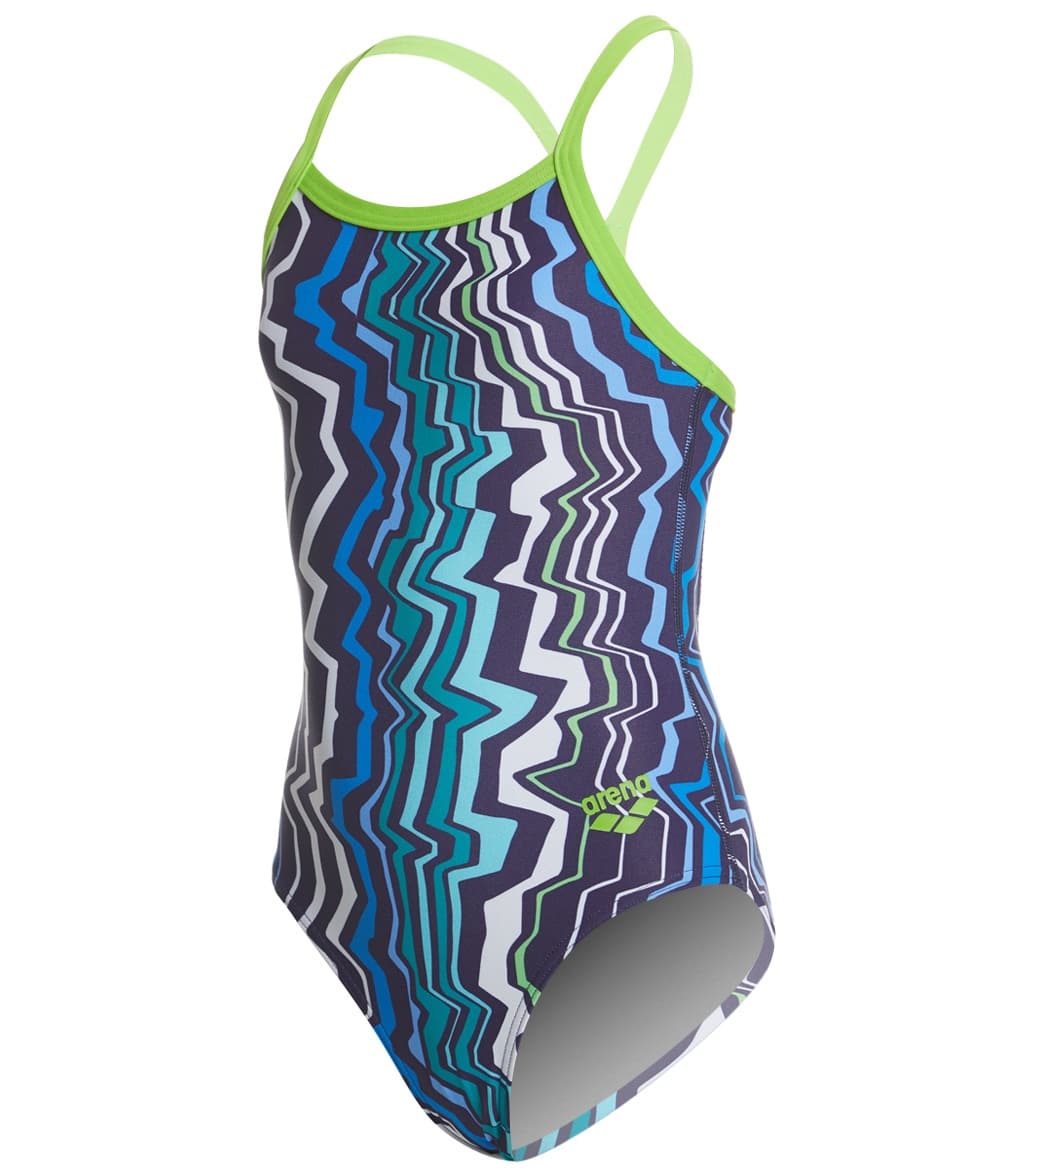 Arena Girls' Zig Zag Maxlife Sporty Thin Strap Racer Back One Piece Swimsuit - Royal/Leaf 22 Polyester/Pbt - Swimoutlet.com